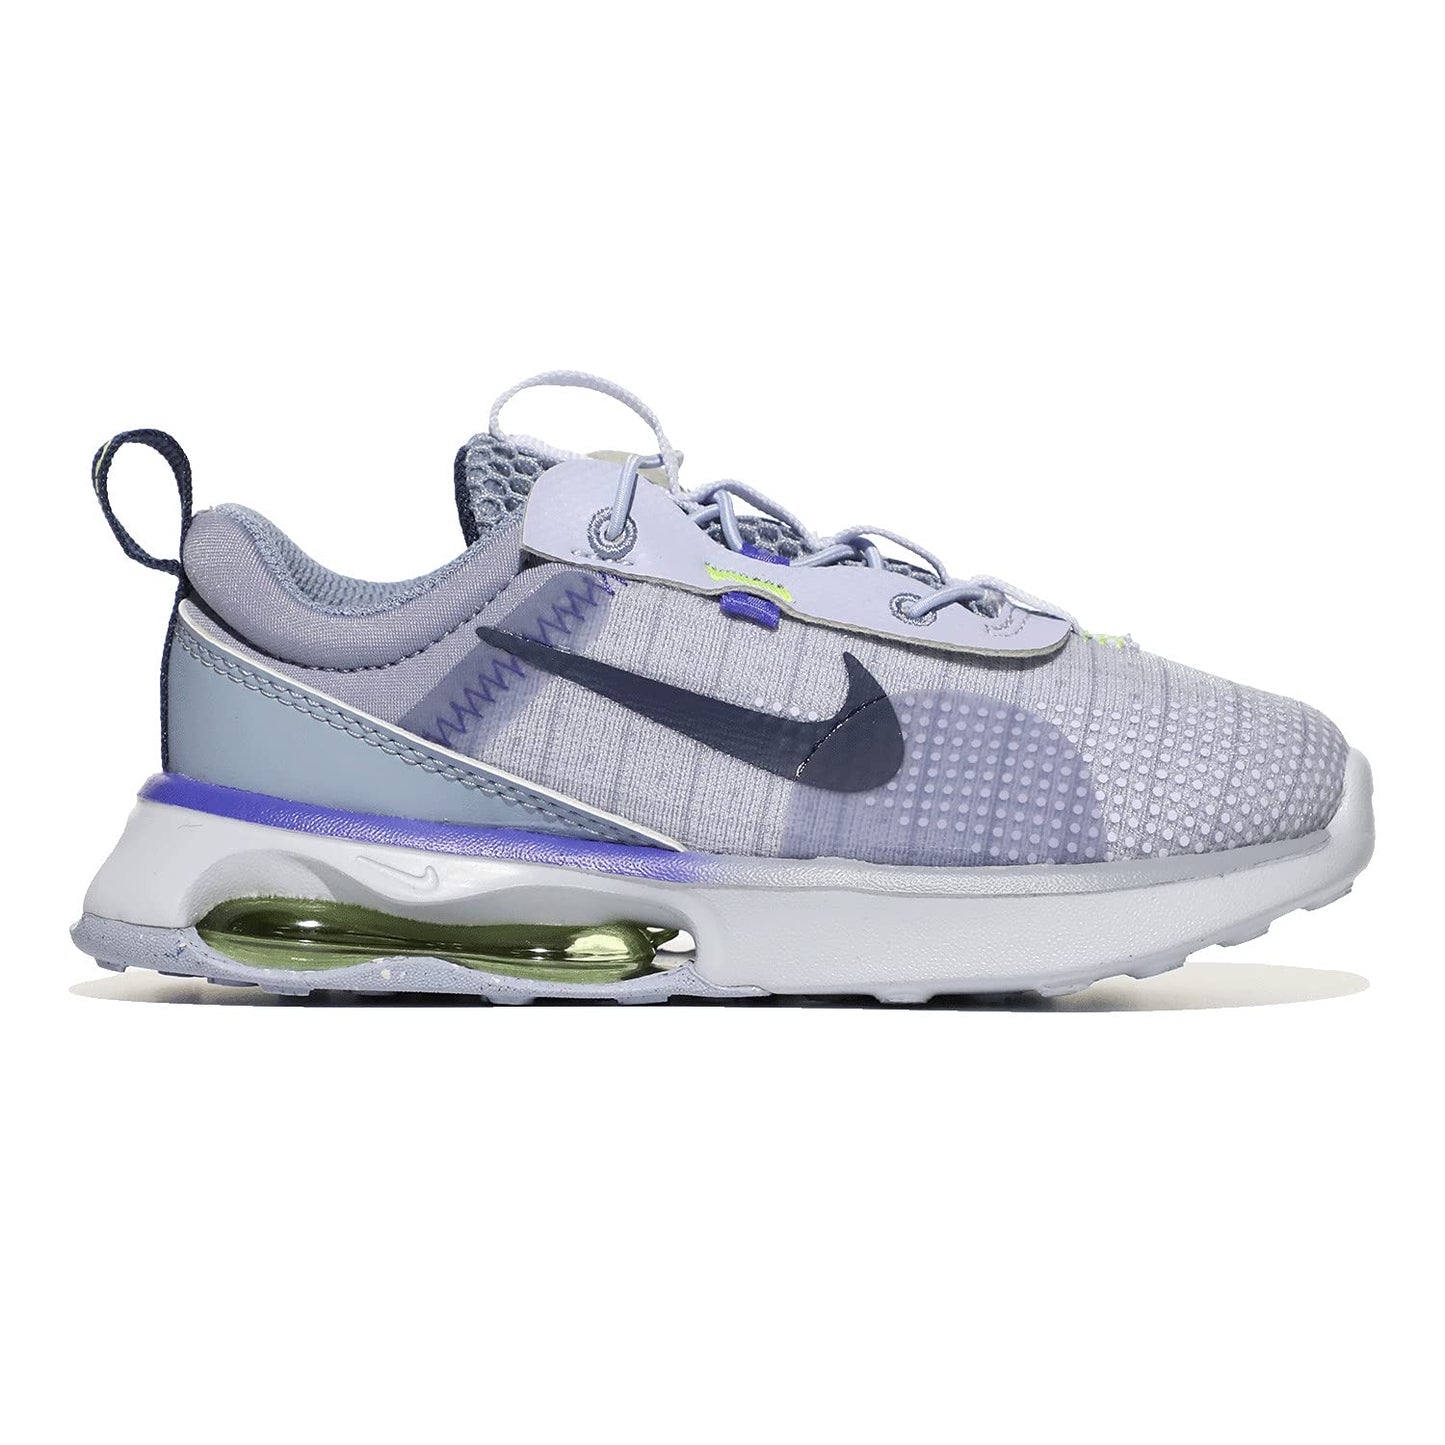 Image 5 of Air Max 2021 (TD) (Infant/Toddler)